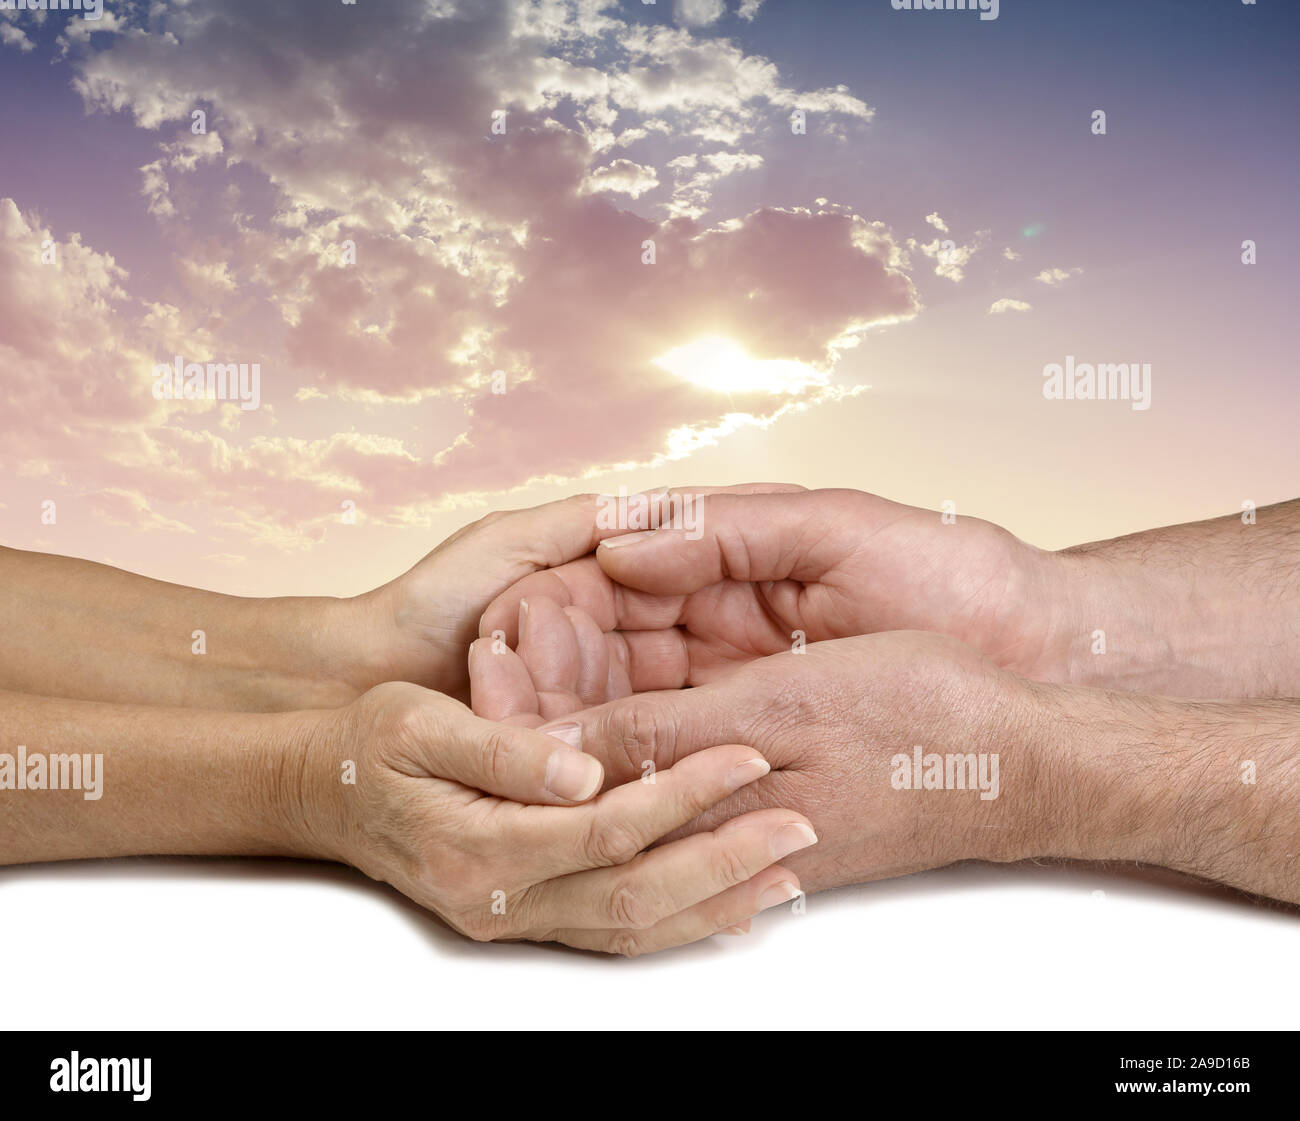 Shedding light on charitable requests - female hands cupped lovingly around male cupped hands against a cloudscape behind and sun shining through Stock Photo